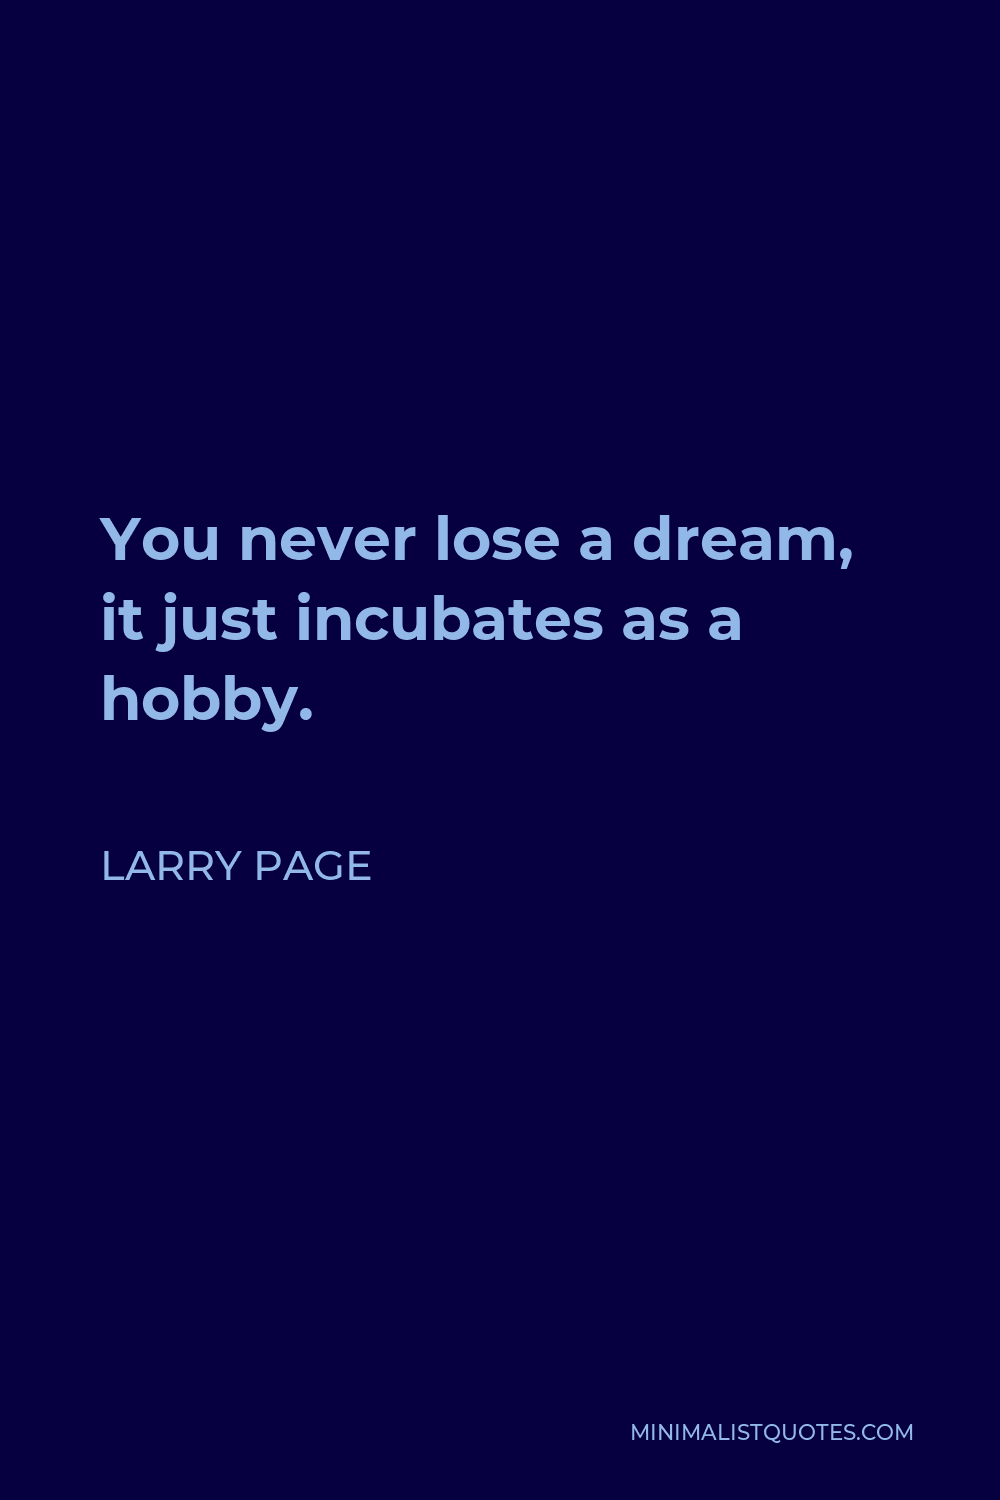 Larry Page Quote - You never lose a dream, it just incubates as a hobby.